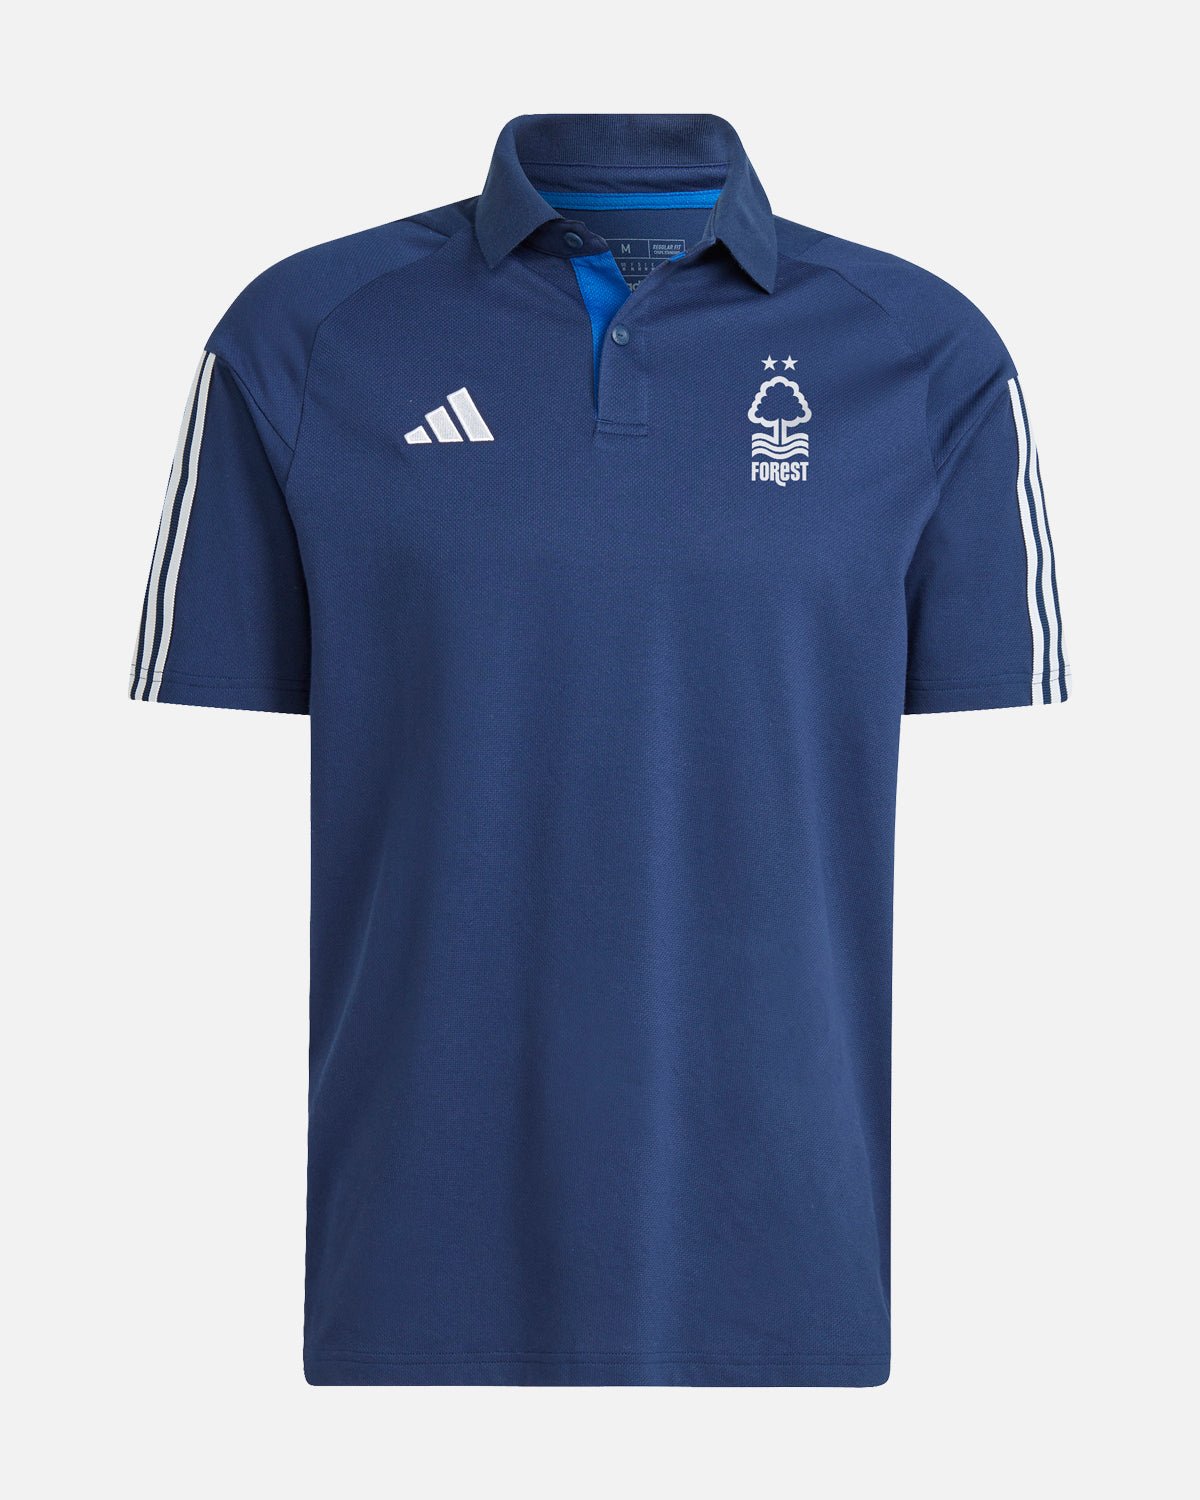 NFFC Junior Navy Travel Polo 23-24 - Nottingham Forest FC